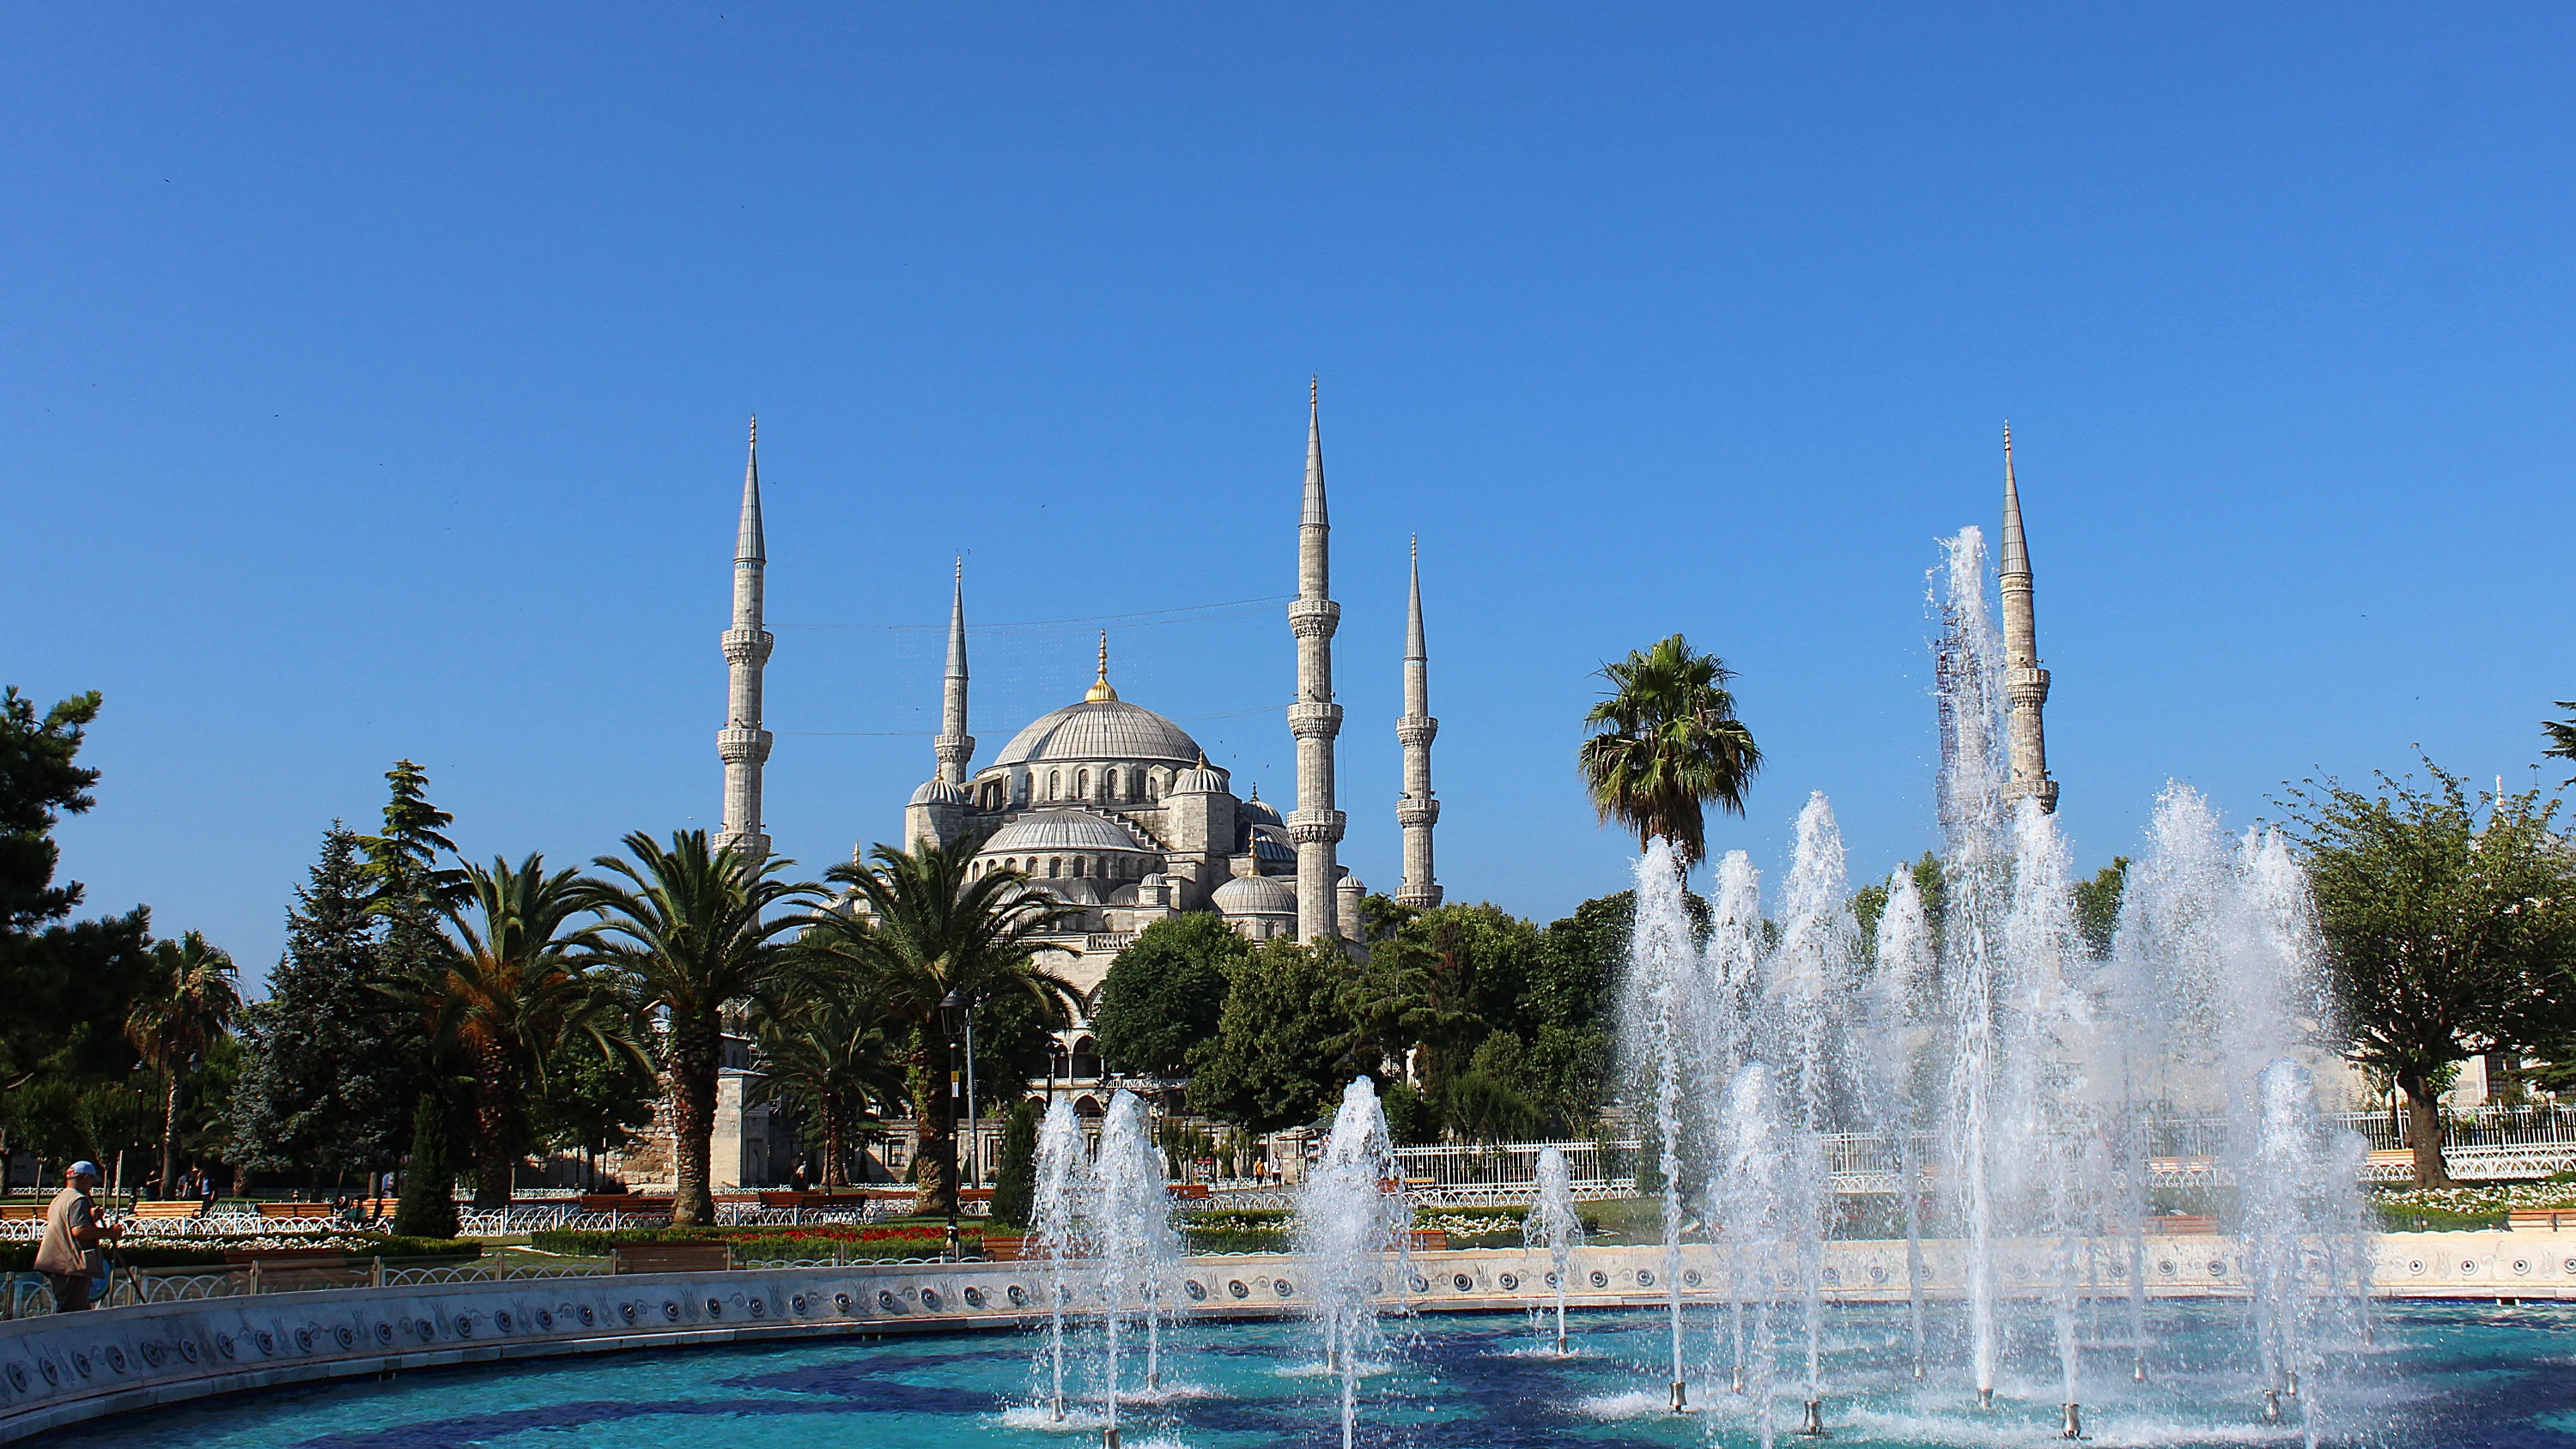 Blue Mosque of Istanbul and a fountain in front.